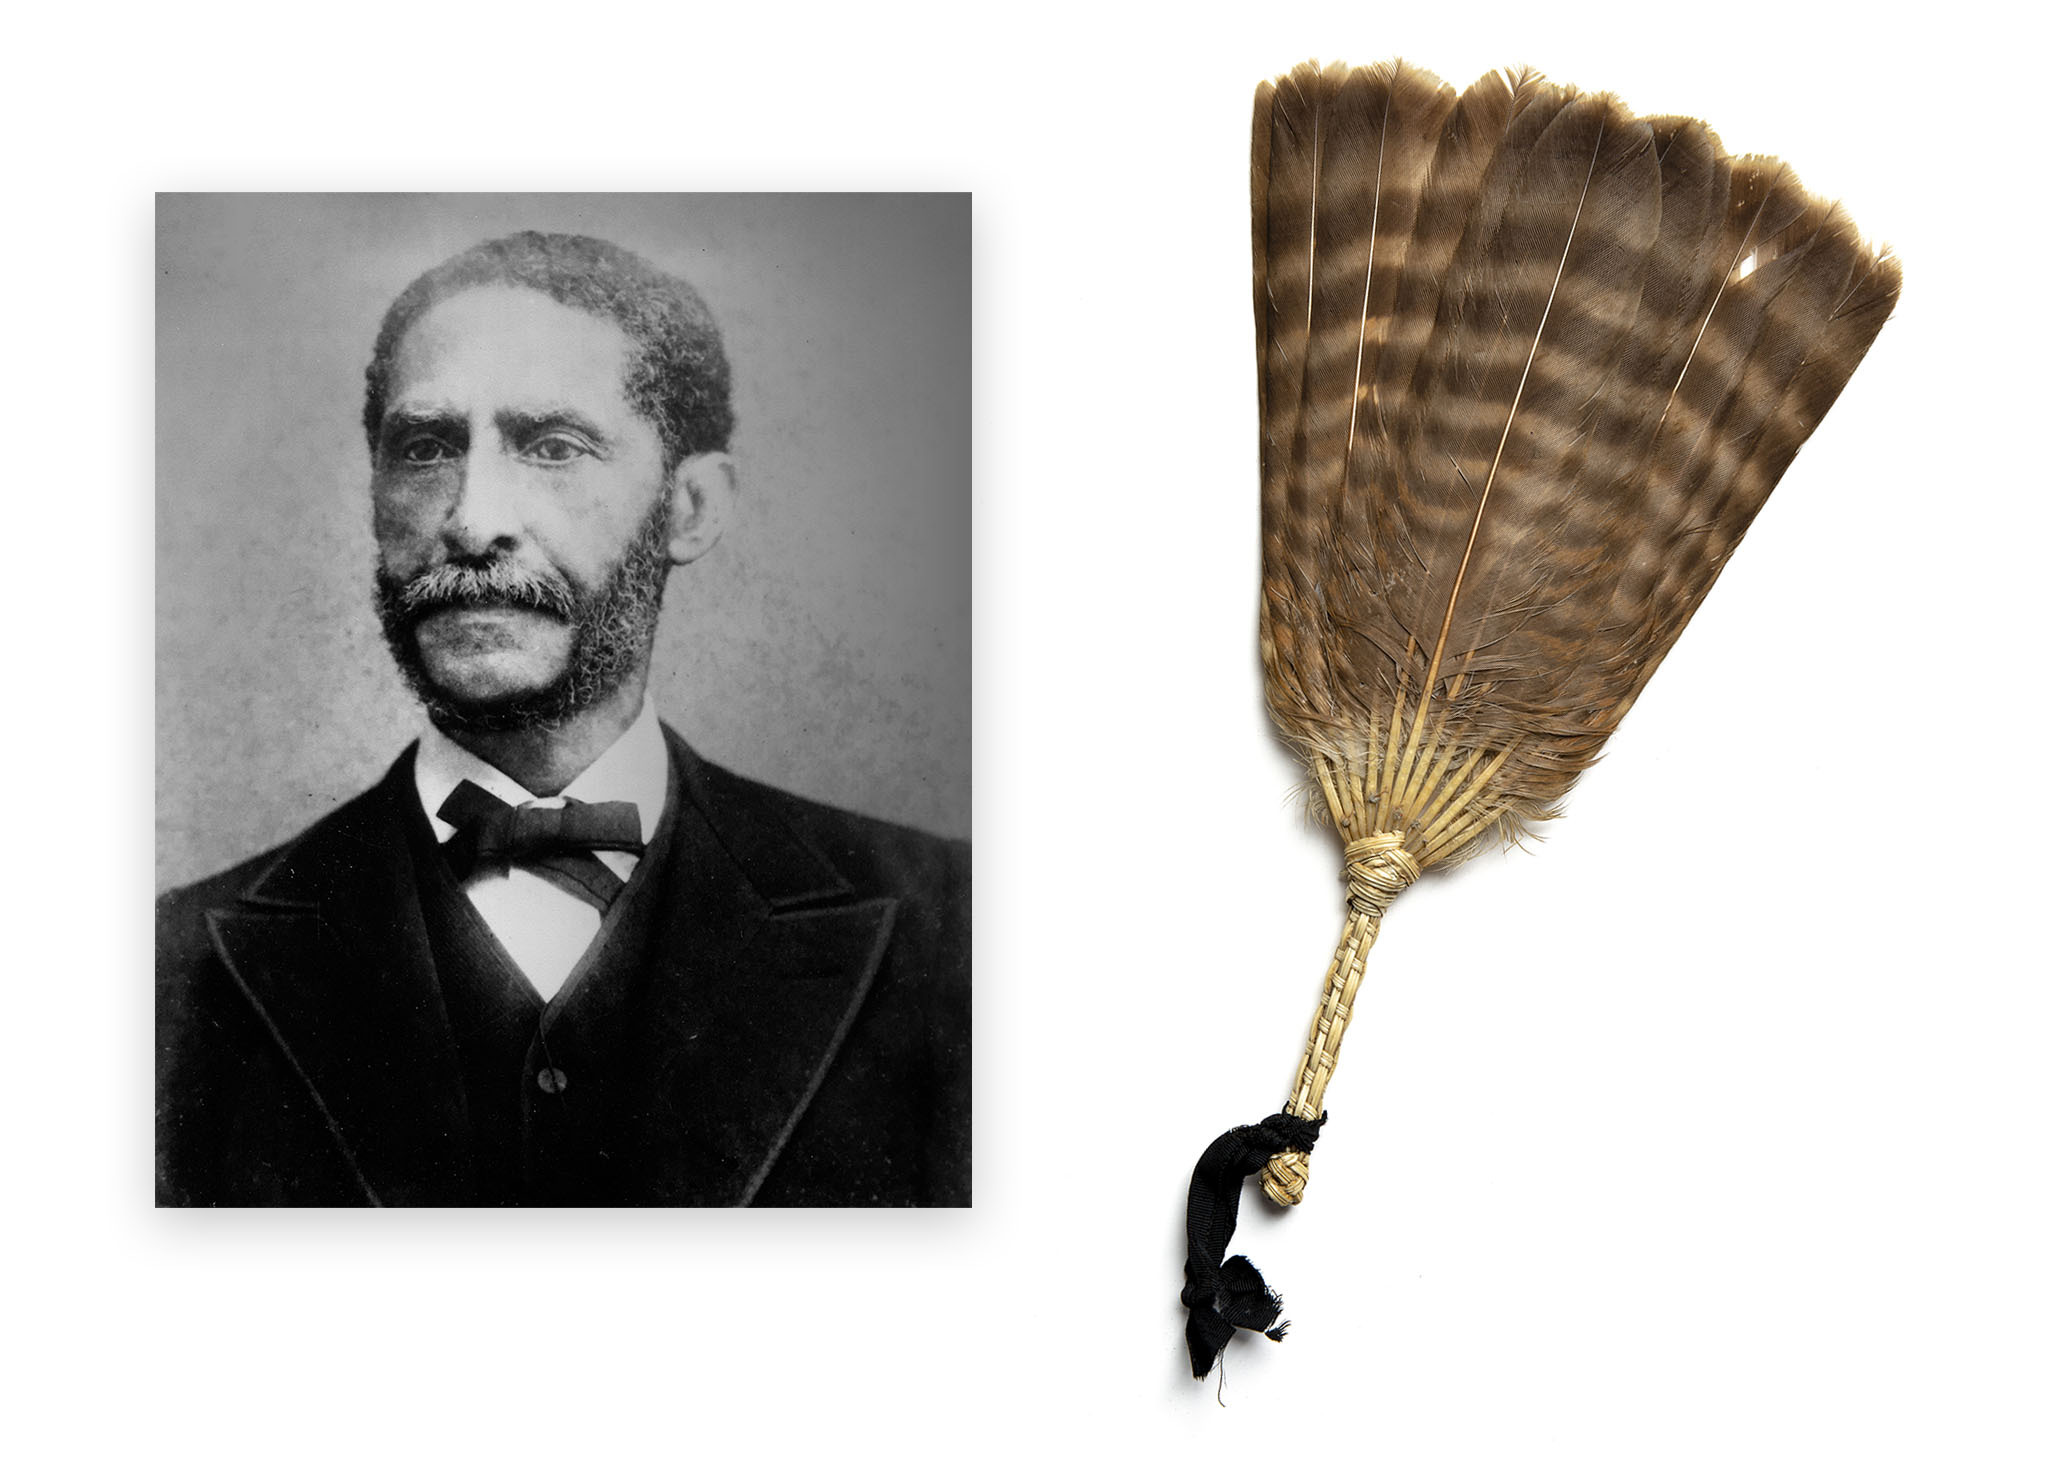 <b>Portrait of Tobias Scott, 1885–1890<b> (left)<br> Tobias Scott (1827–1904) was born with slave status on a James Island plantation, but his enslaver permitted him to make and sell fans in his spare time. Eventually, Scott was able to purchase his freedom and moved to a house in Charleston with his wife Christiana after the Civil War. Courtesy of the descendants of Tobias & Christiana Scott, 2015 <br><br><b>Fan, c. 1880</b> (right)<br> Scott’s talent can be clearly seen in the fine work on the fan handle and selection of well matched feathers. As written in an 1886 Charleston News and Courier article, a visitor to Scott’s shop at 17 Water Street noted the fans of all plumages were of a “rare and exquisite beauty.”